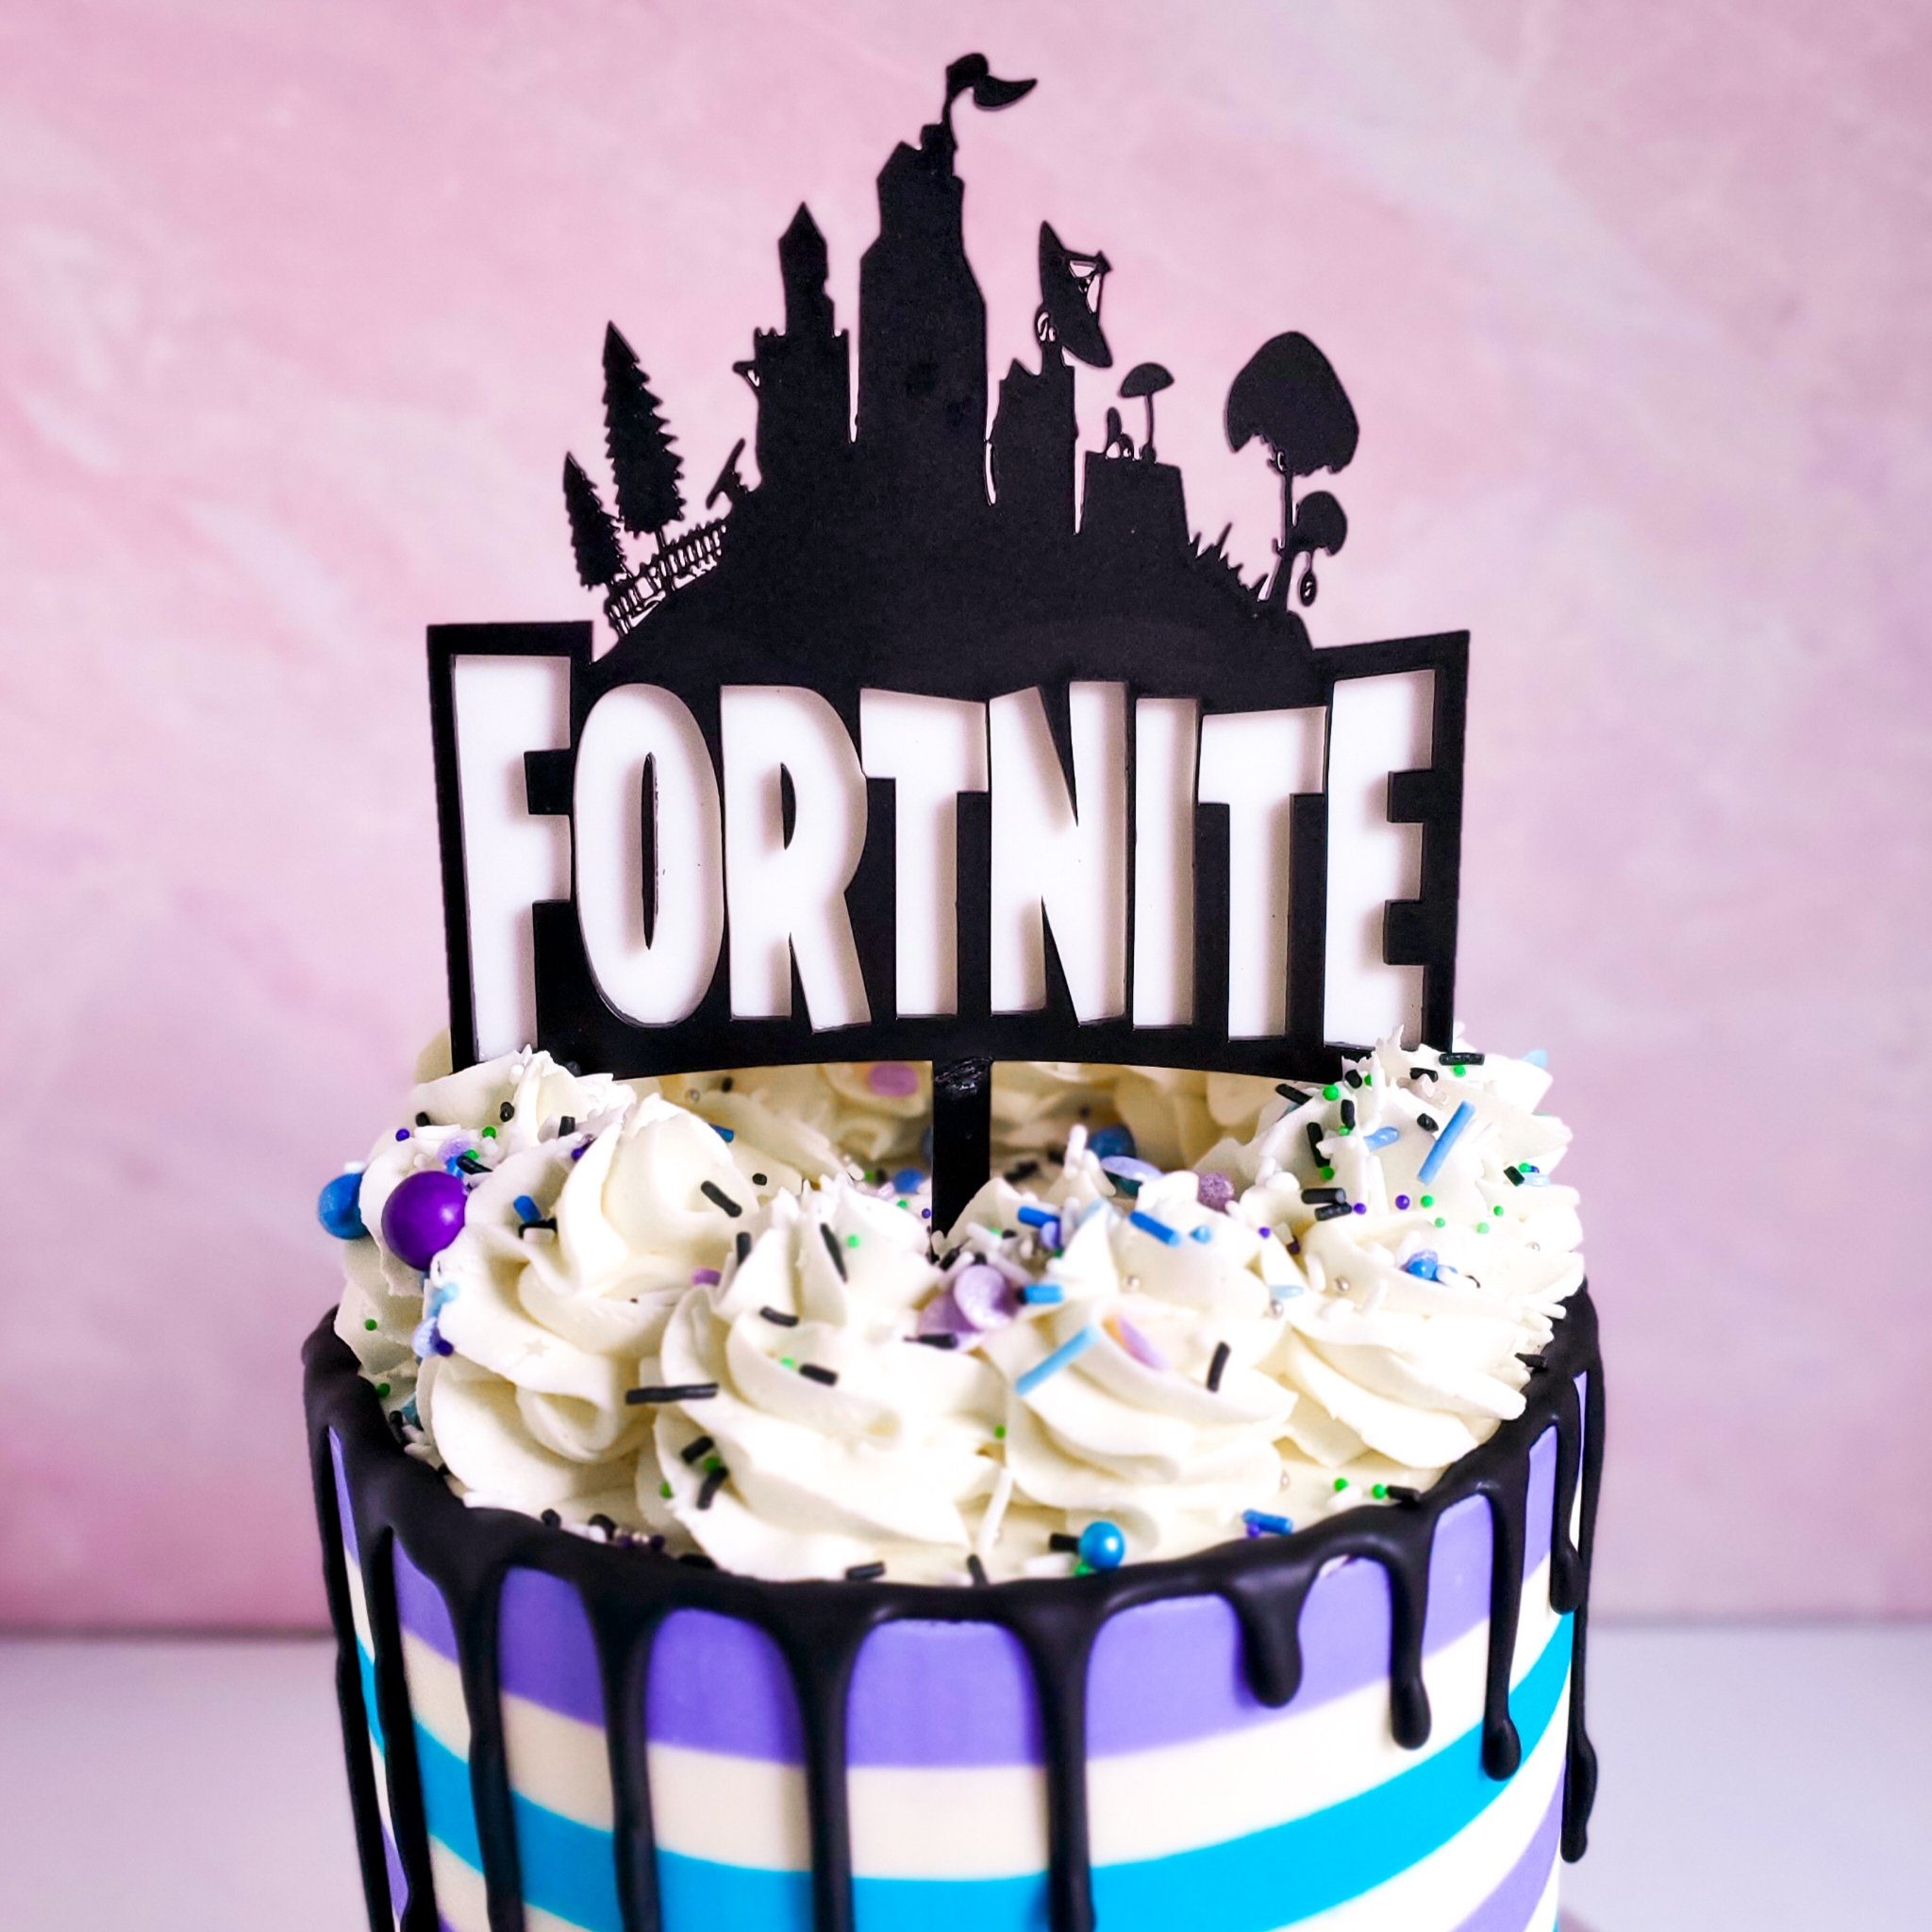 All Birthday Cake Locations - Fortnite (5th Birthday Quests 2022) - YouTube